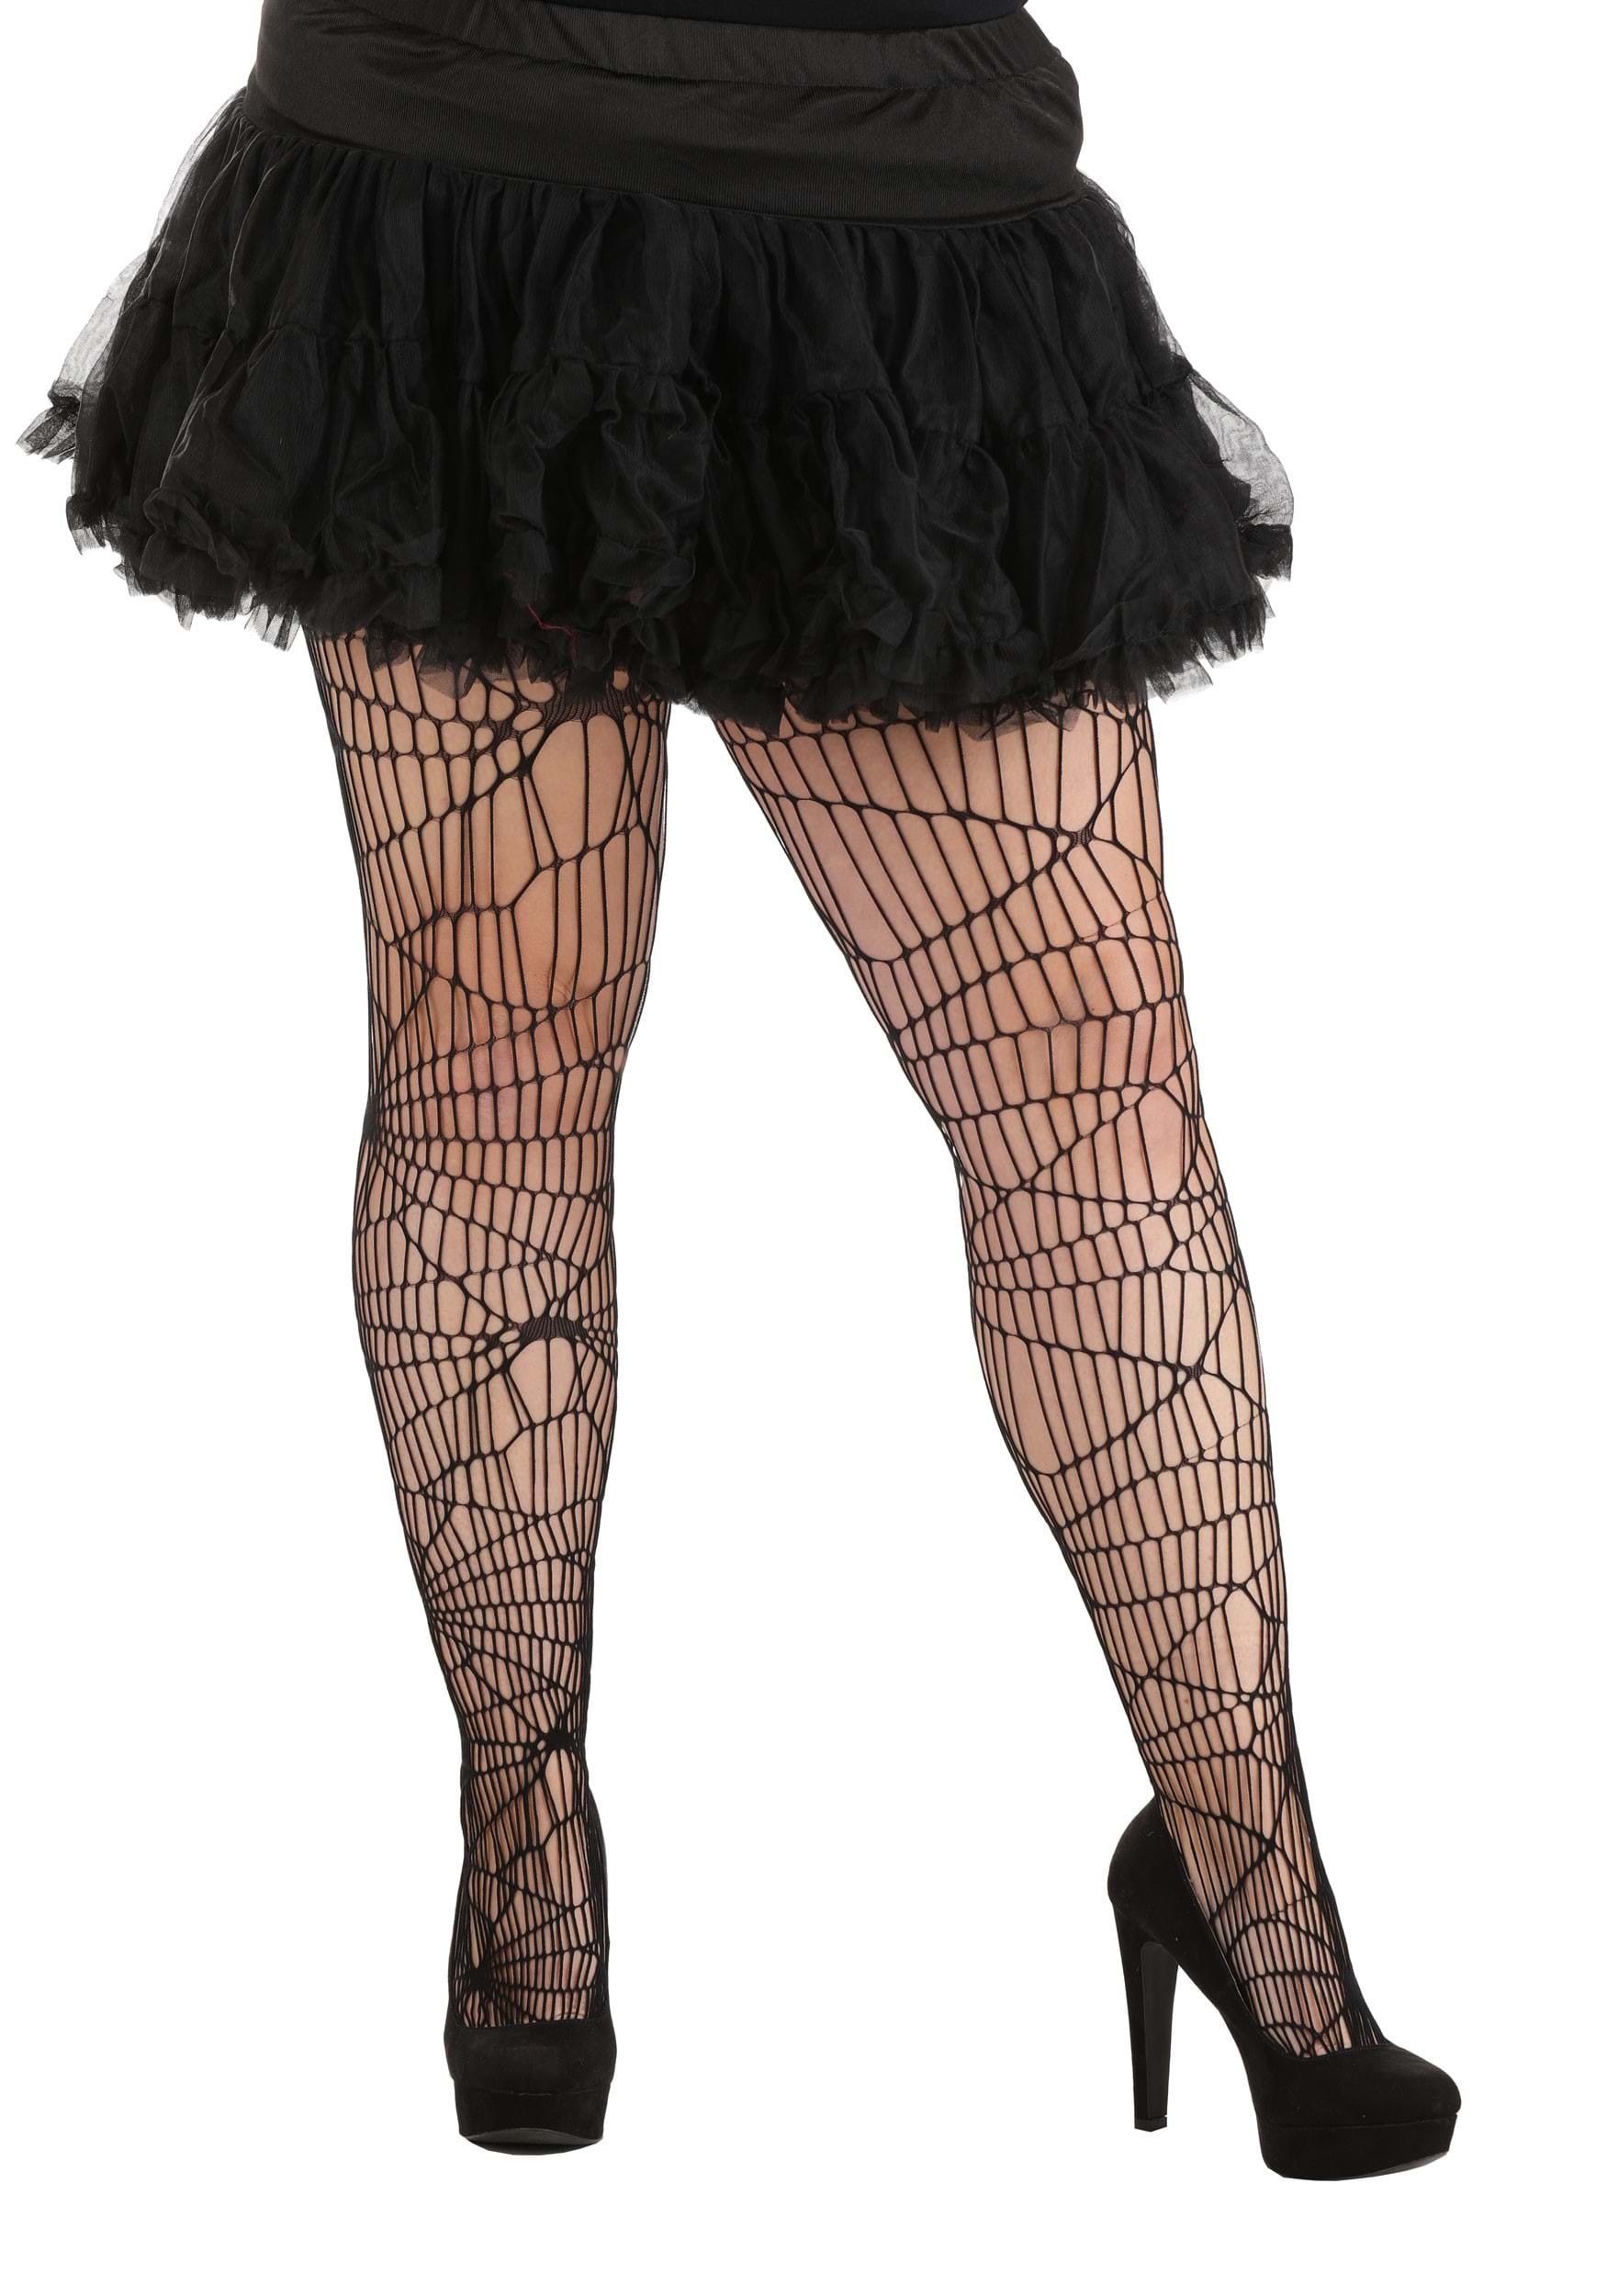 https://images.halloweencostumes.com/products/87770/1-1/plus-size-deluxe-spiderweb-tights.jpg